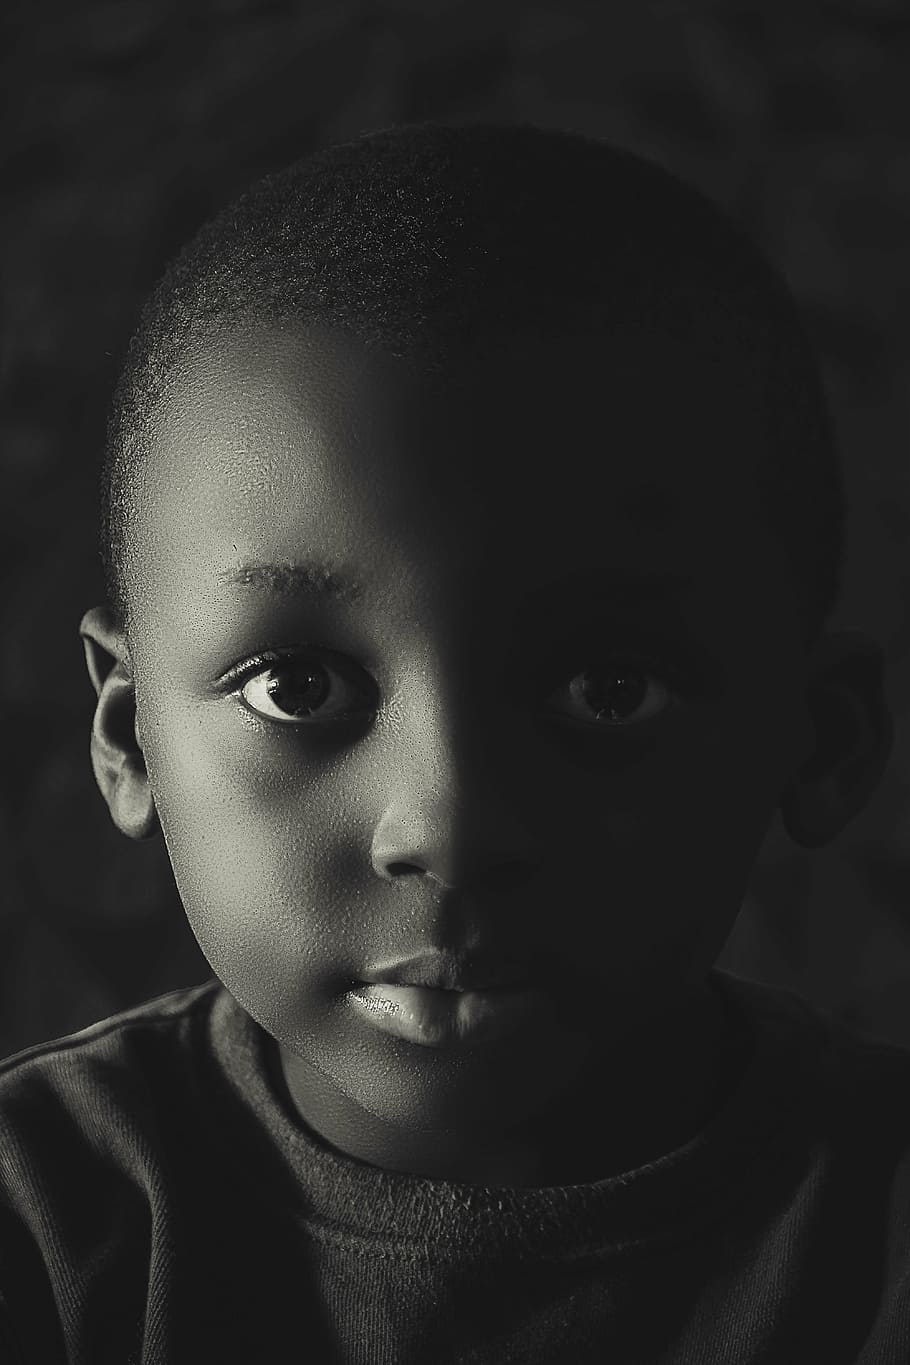 grayscale portrait photography, child, kids, photography, black, portrait, dramatic portrait, portraiture, african, people